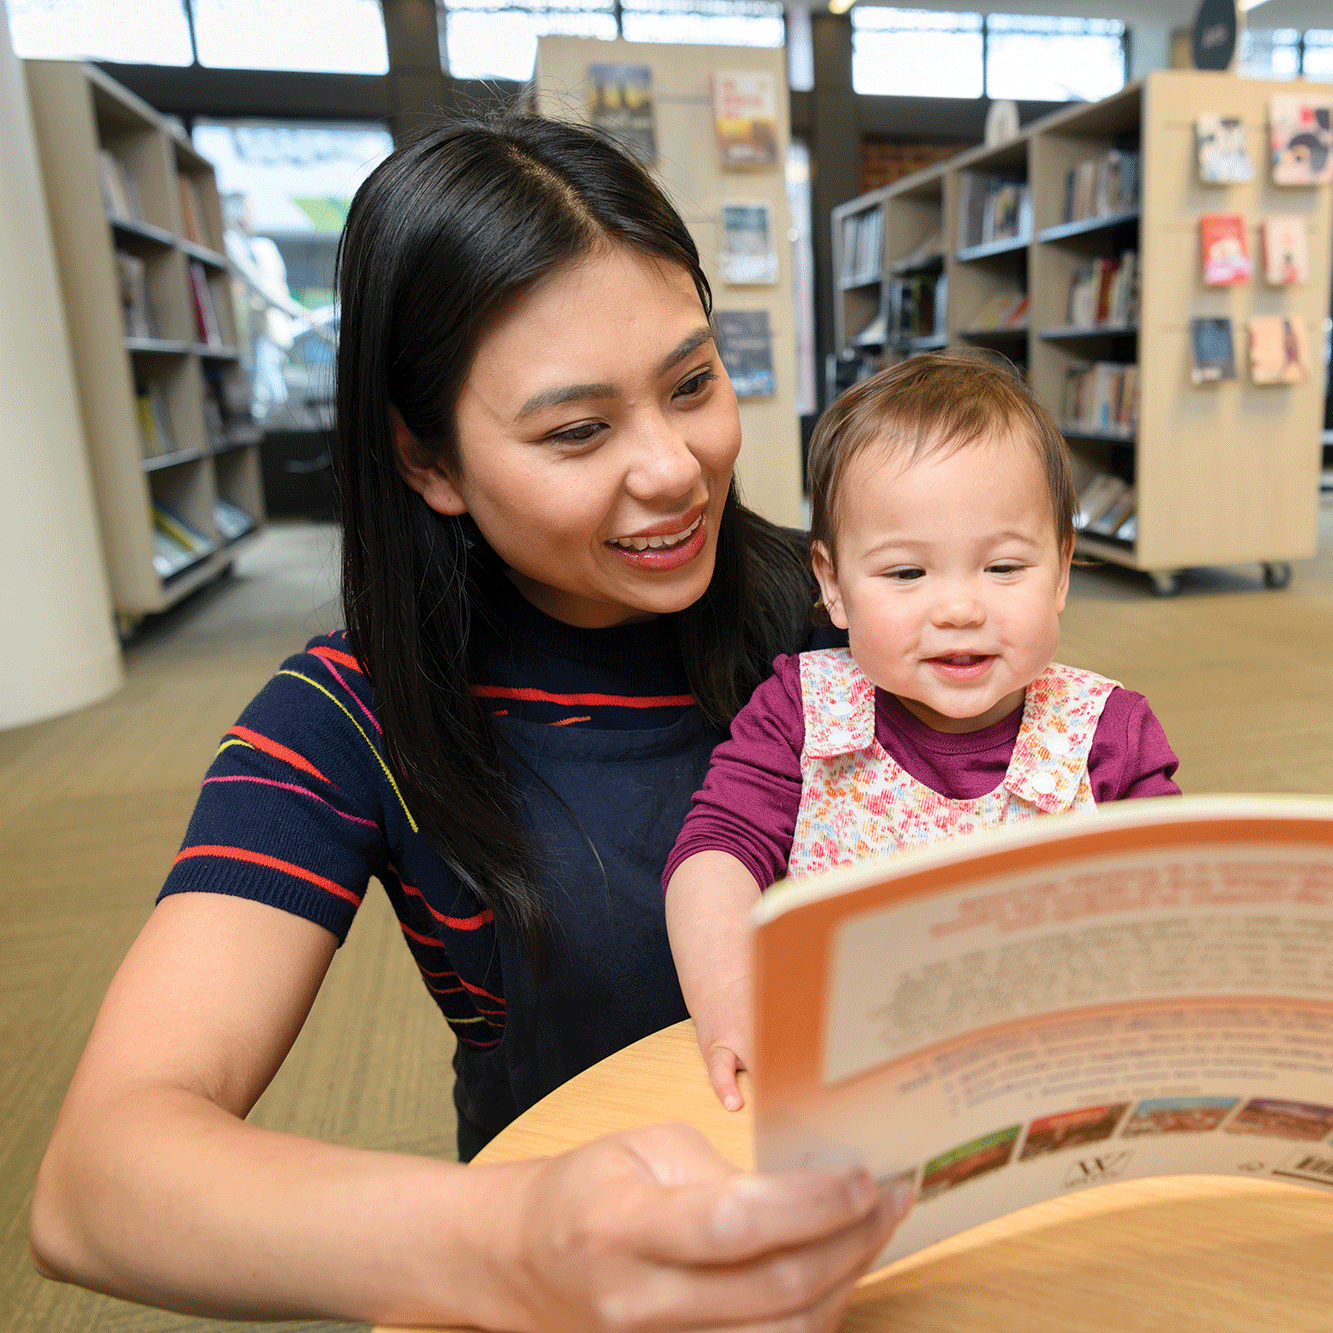 A women reading to her daughter in a library